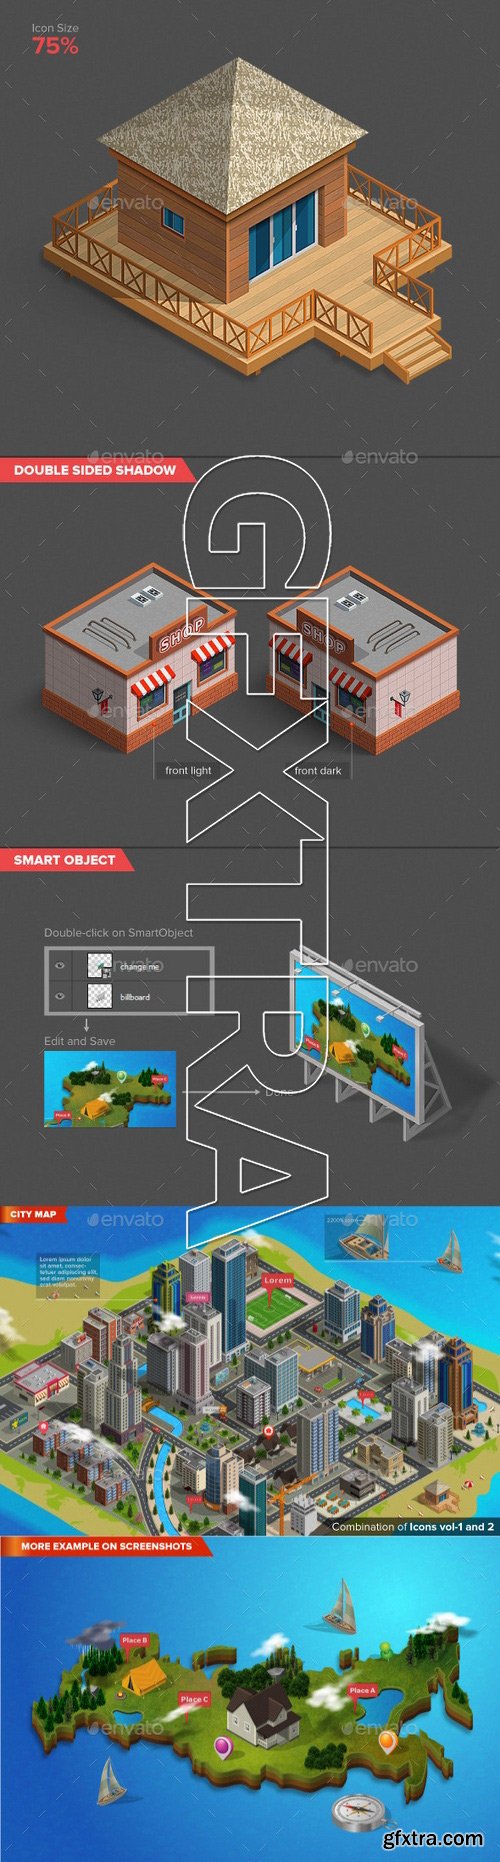 GraphicRiver - Isometric Map Icons Vol.01 9584369